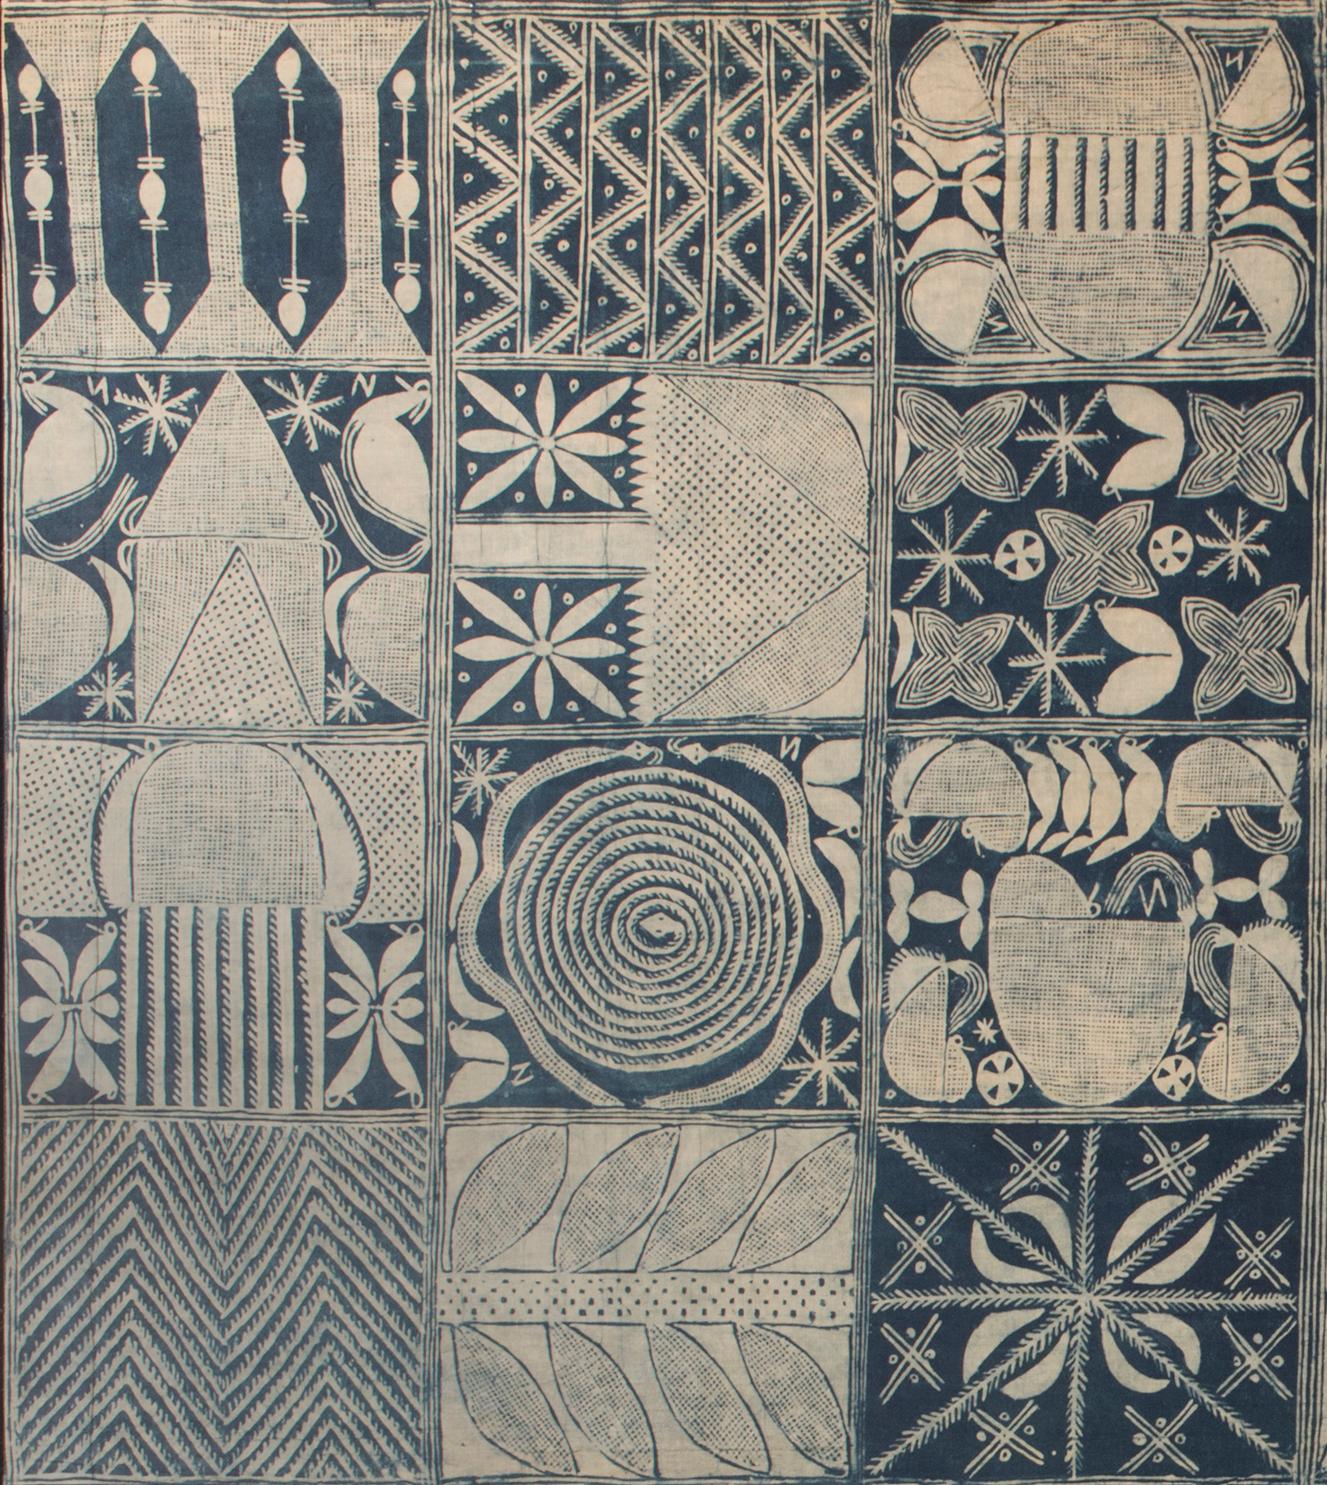 This elaborate indigo-dyed fabric panel comes from the Yoruba People of Nigeria.